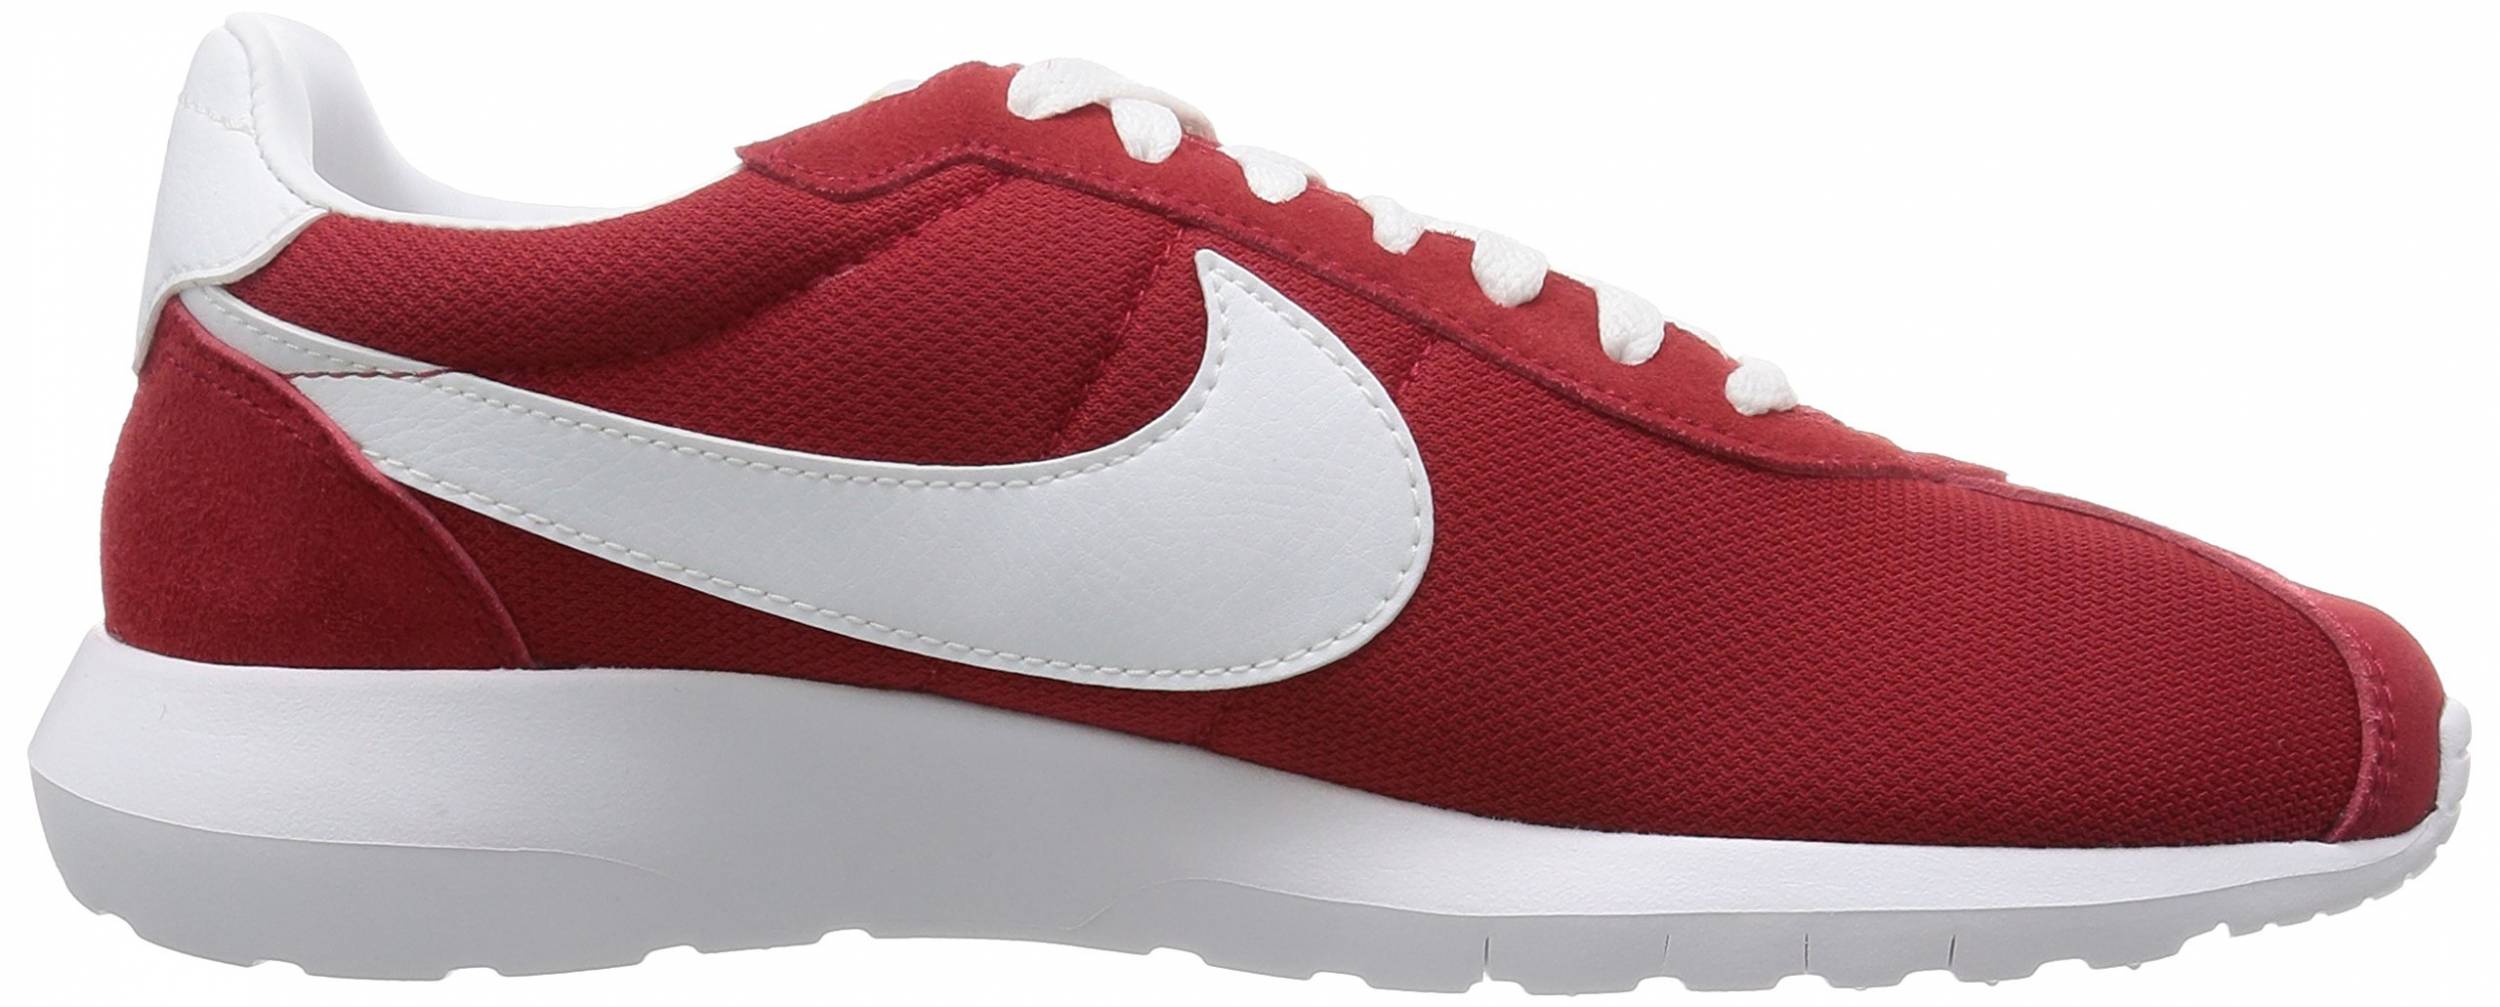 roshe shoes red